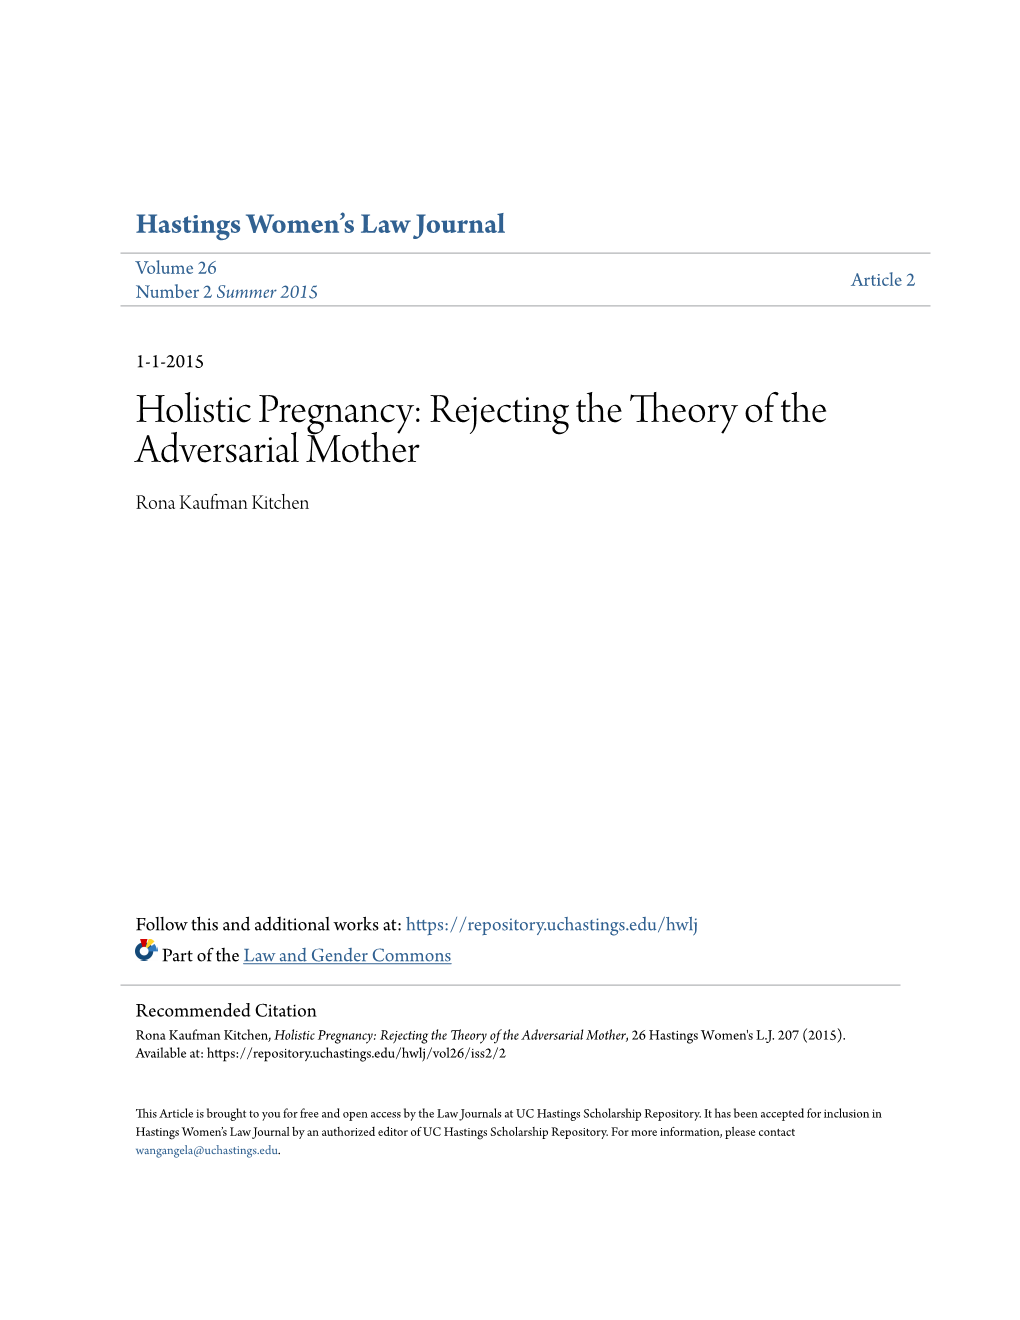 Holistic Pregnancy: Rejecting the Theory of the Adversarial Mother Rona Kaufman Kitchen